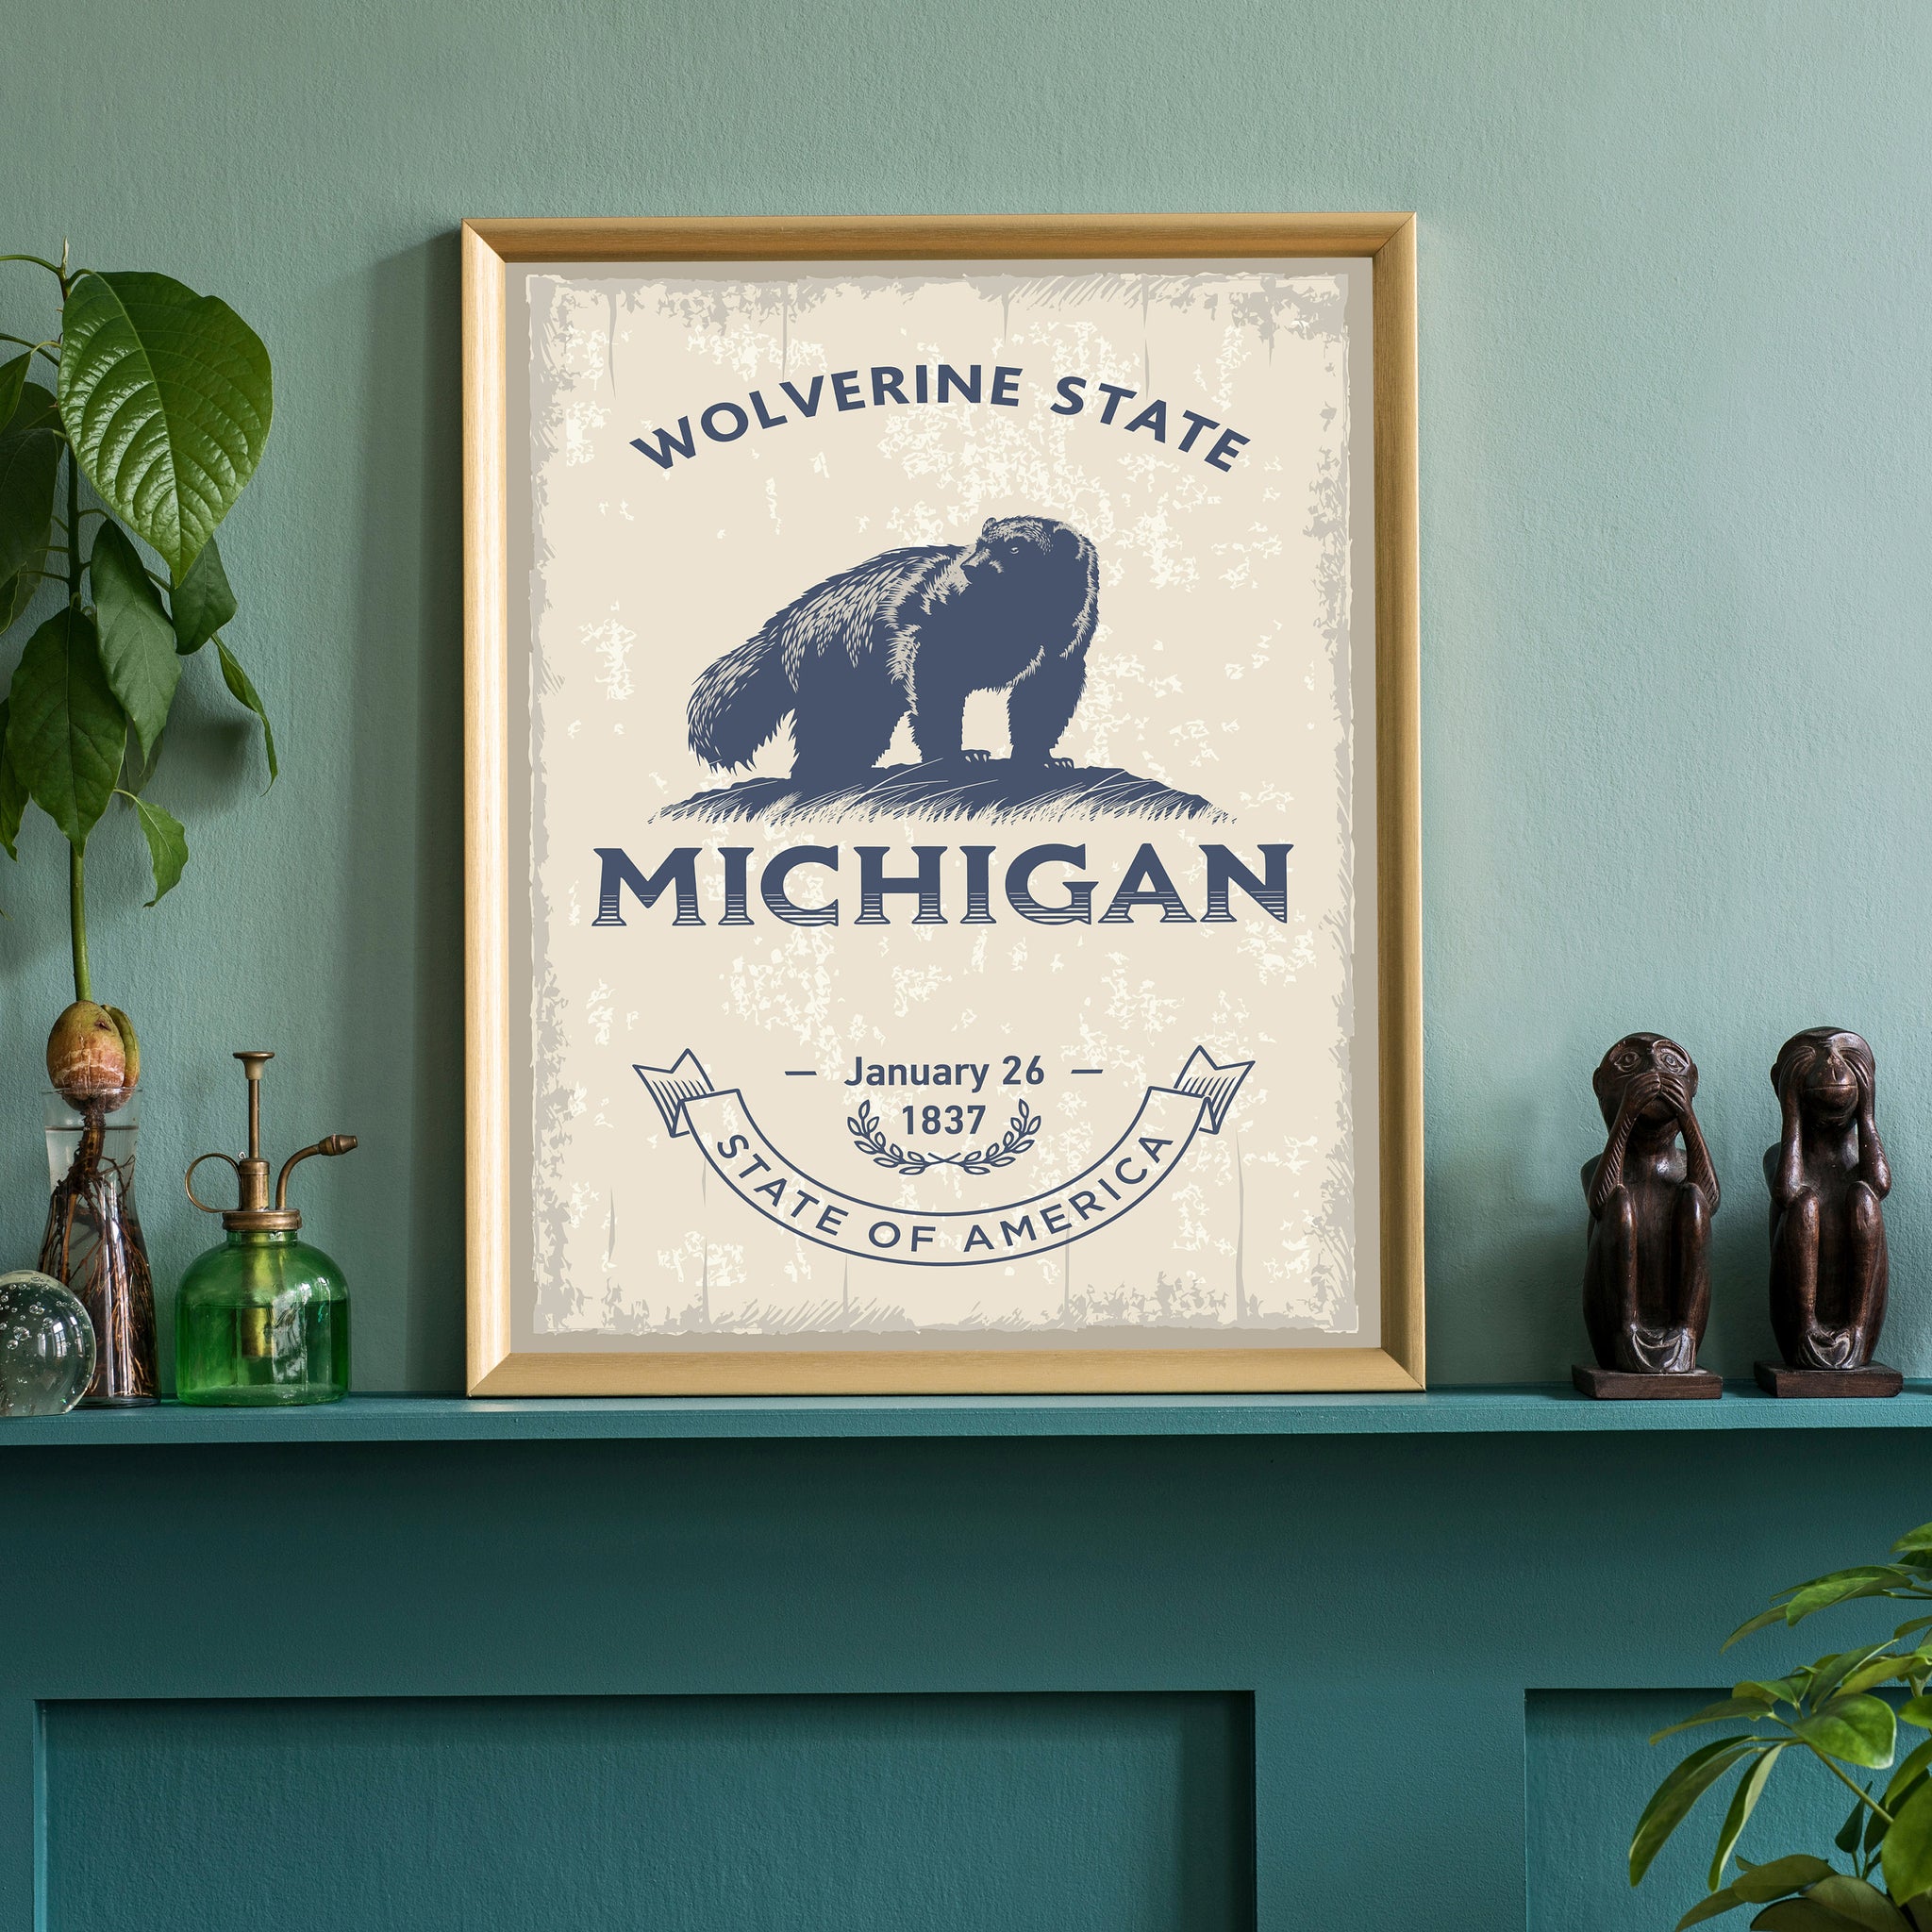 Michigan State Symbol Poster, Michigan State Poster Print, Michigan State Emblem Poster, Retro Travel State Poster, Home and Office Wall Art